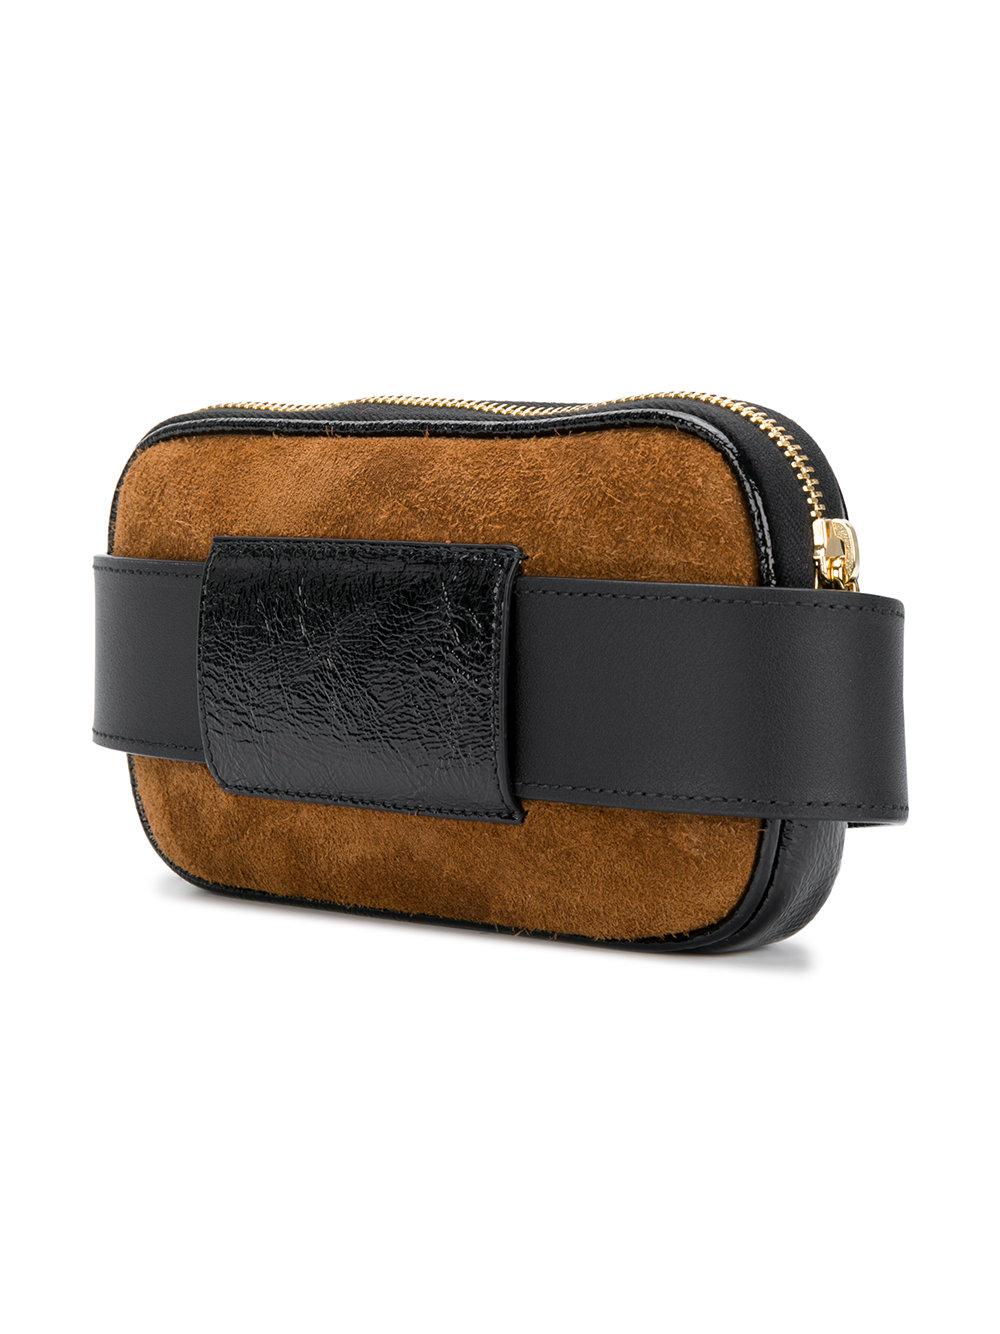 Gucci Leather Ophidia Belt Bag in Brown - Lyst